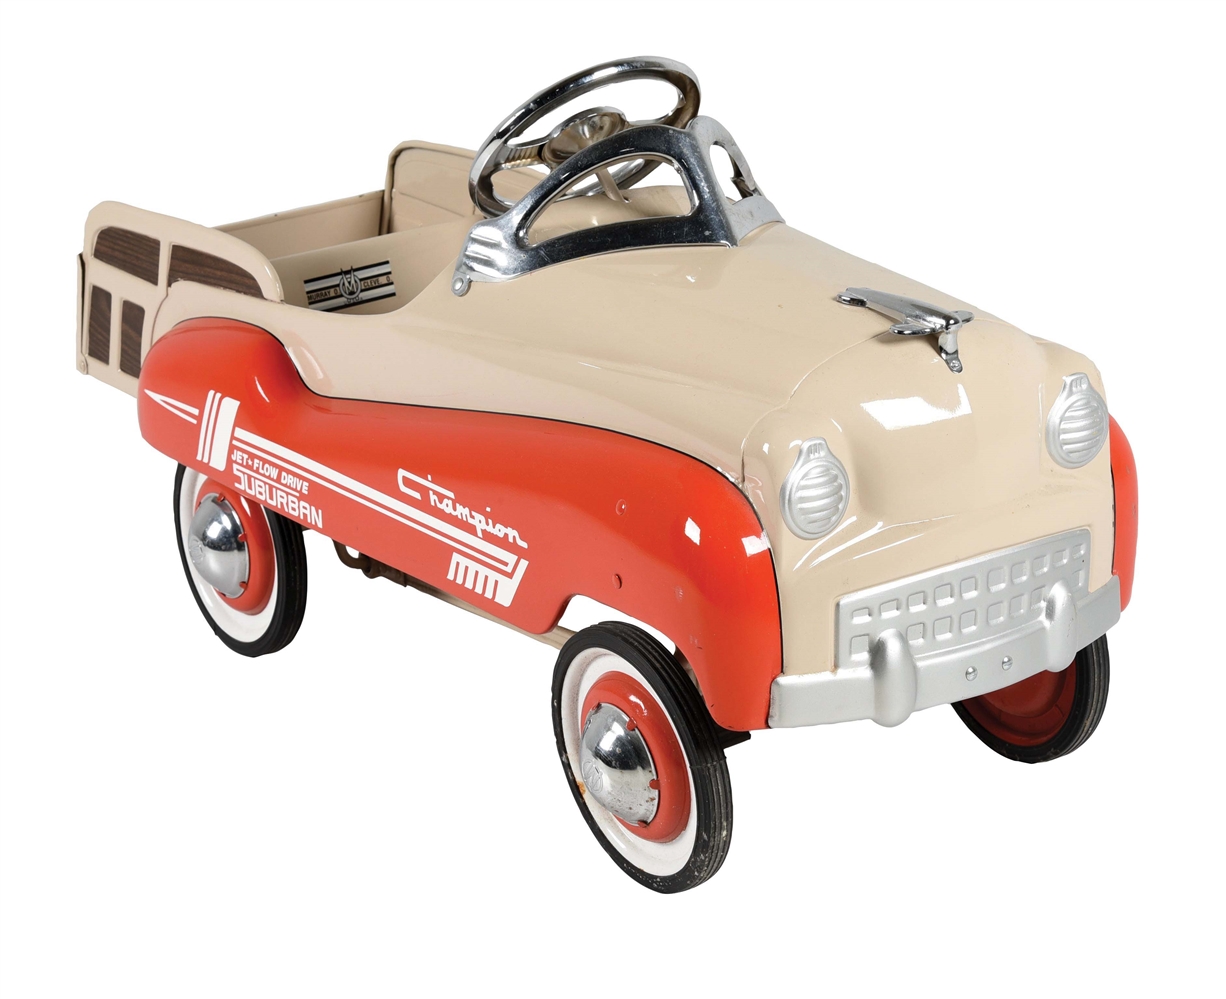 1950S STYLE MURRAY OF CLEVELAND, OHIO DELUXE CHAMPION JET FLOW DRIVE SUBURBAN STATION WAGON PEDAL CAR.